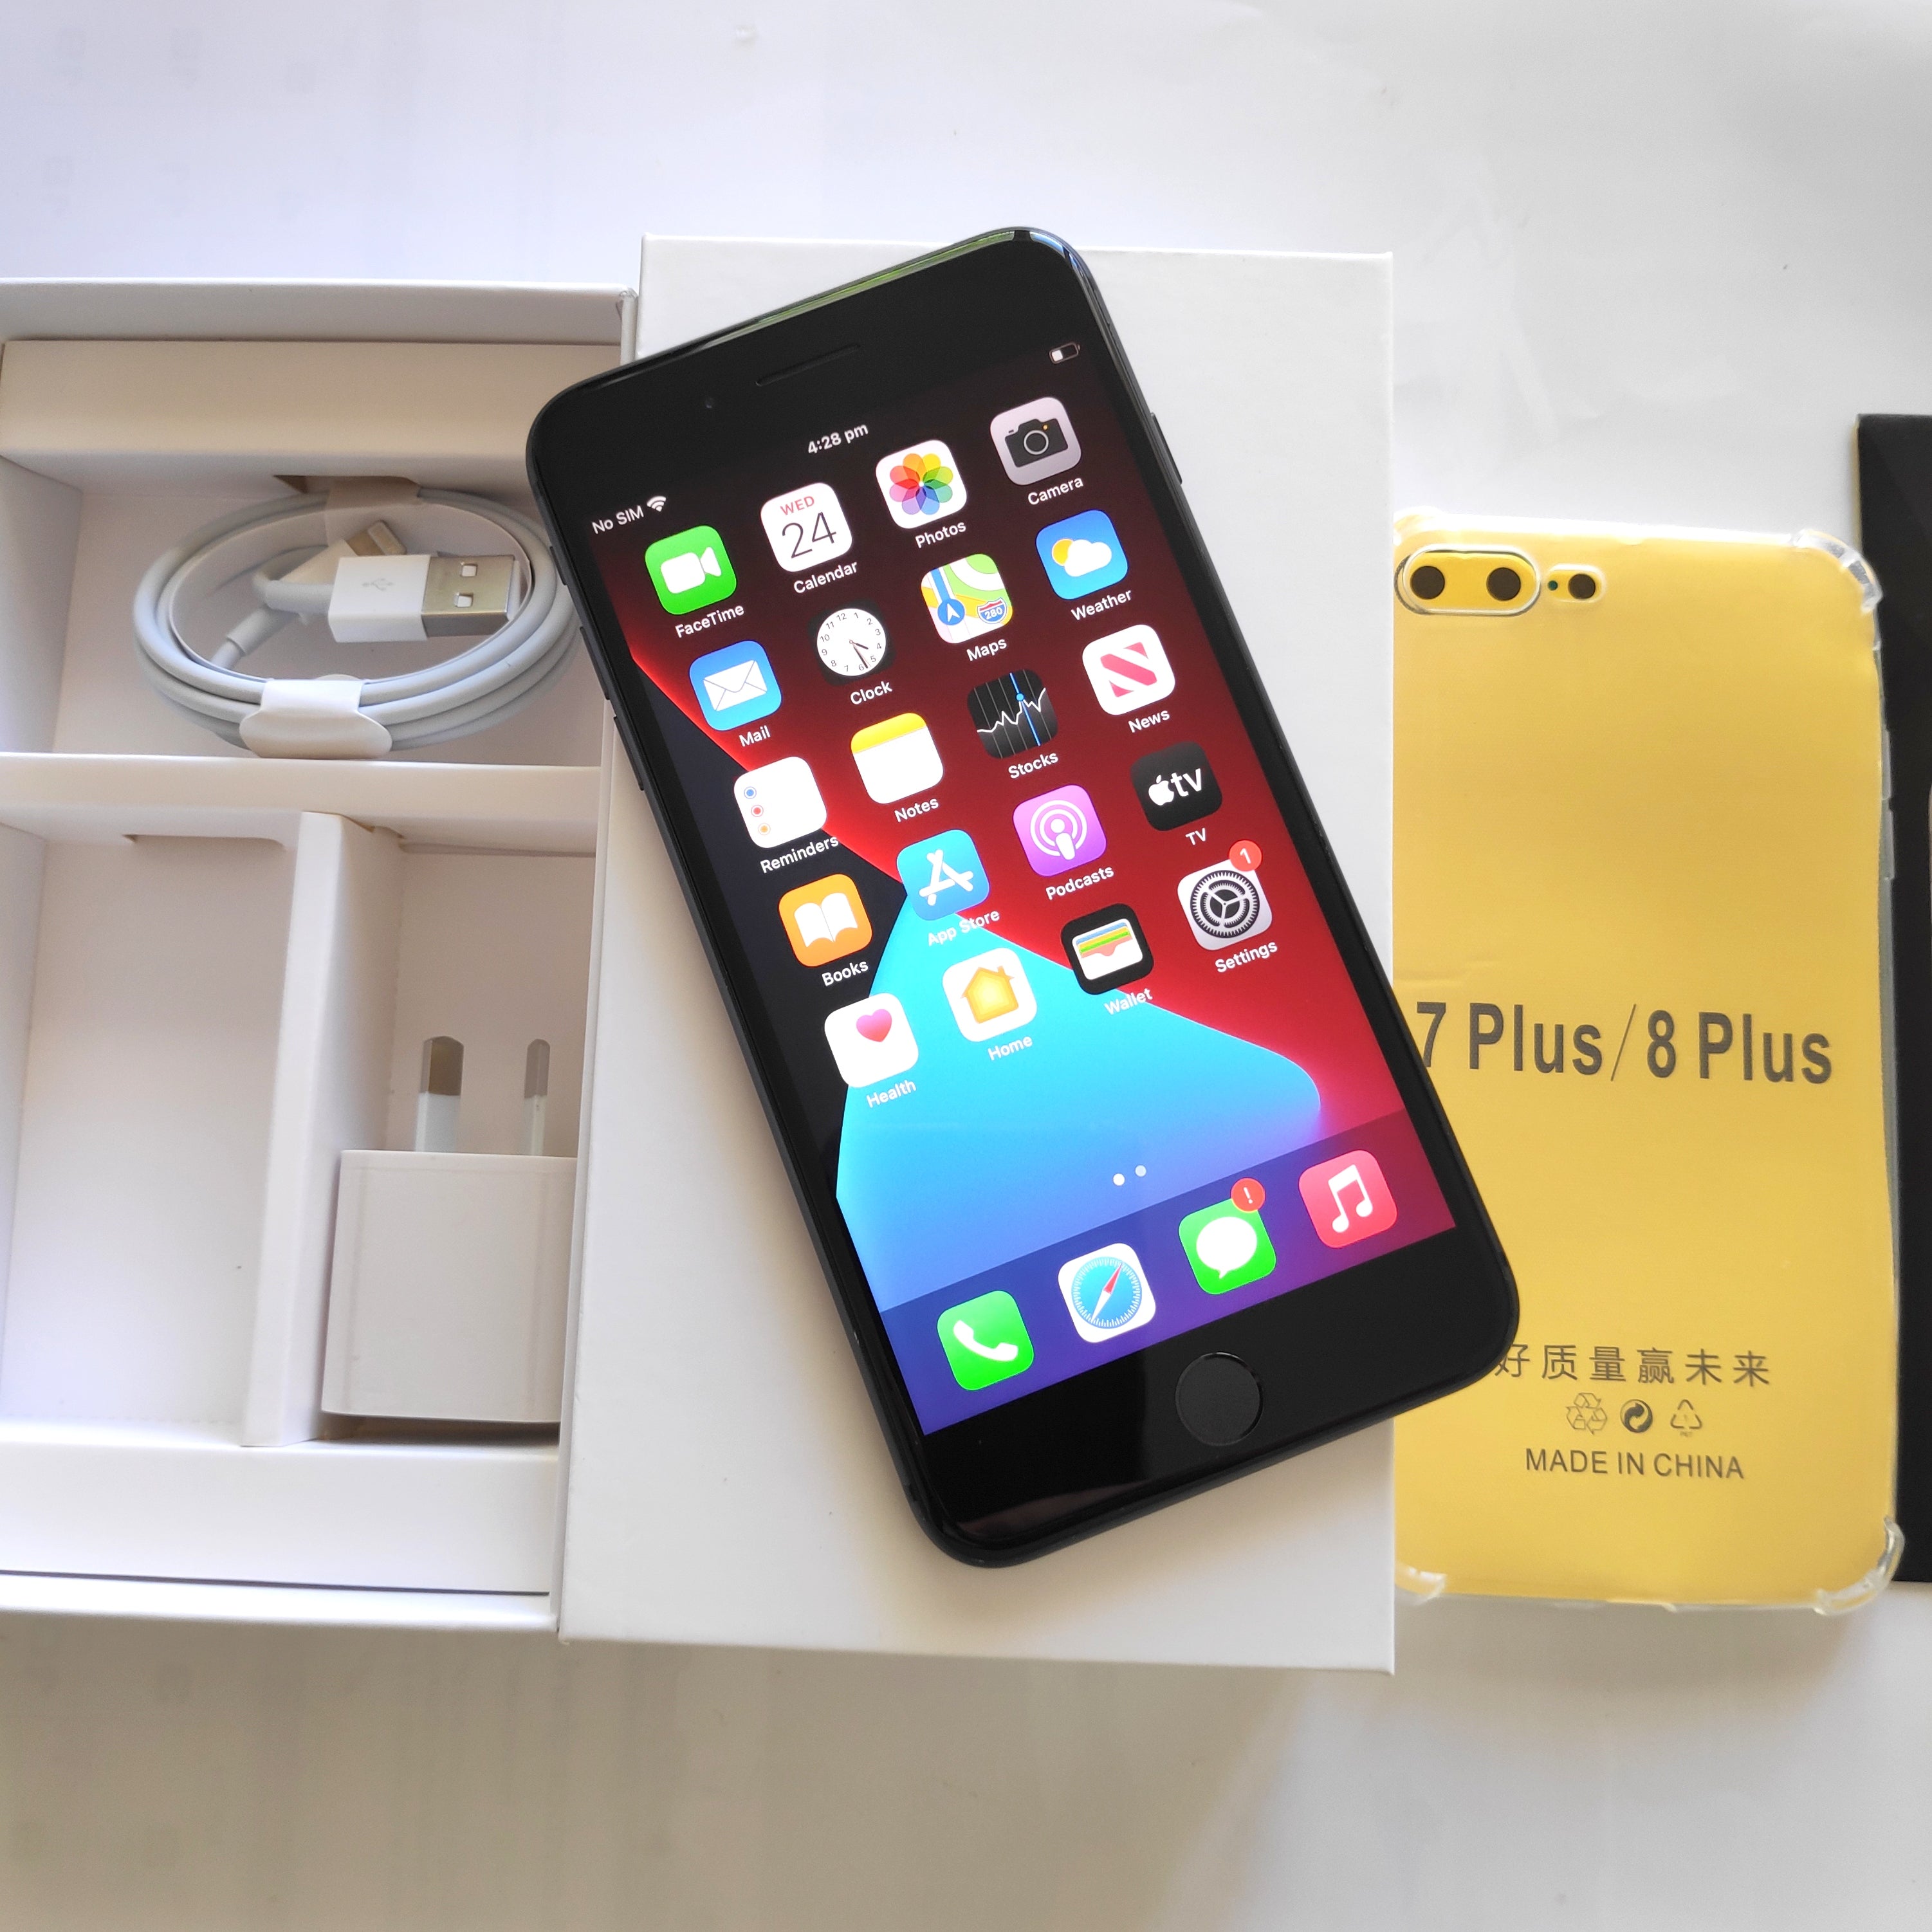 laybuy iphone nz,Used iPhone 8 Plus,Affordable iPhone 8 Plus